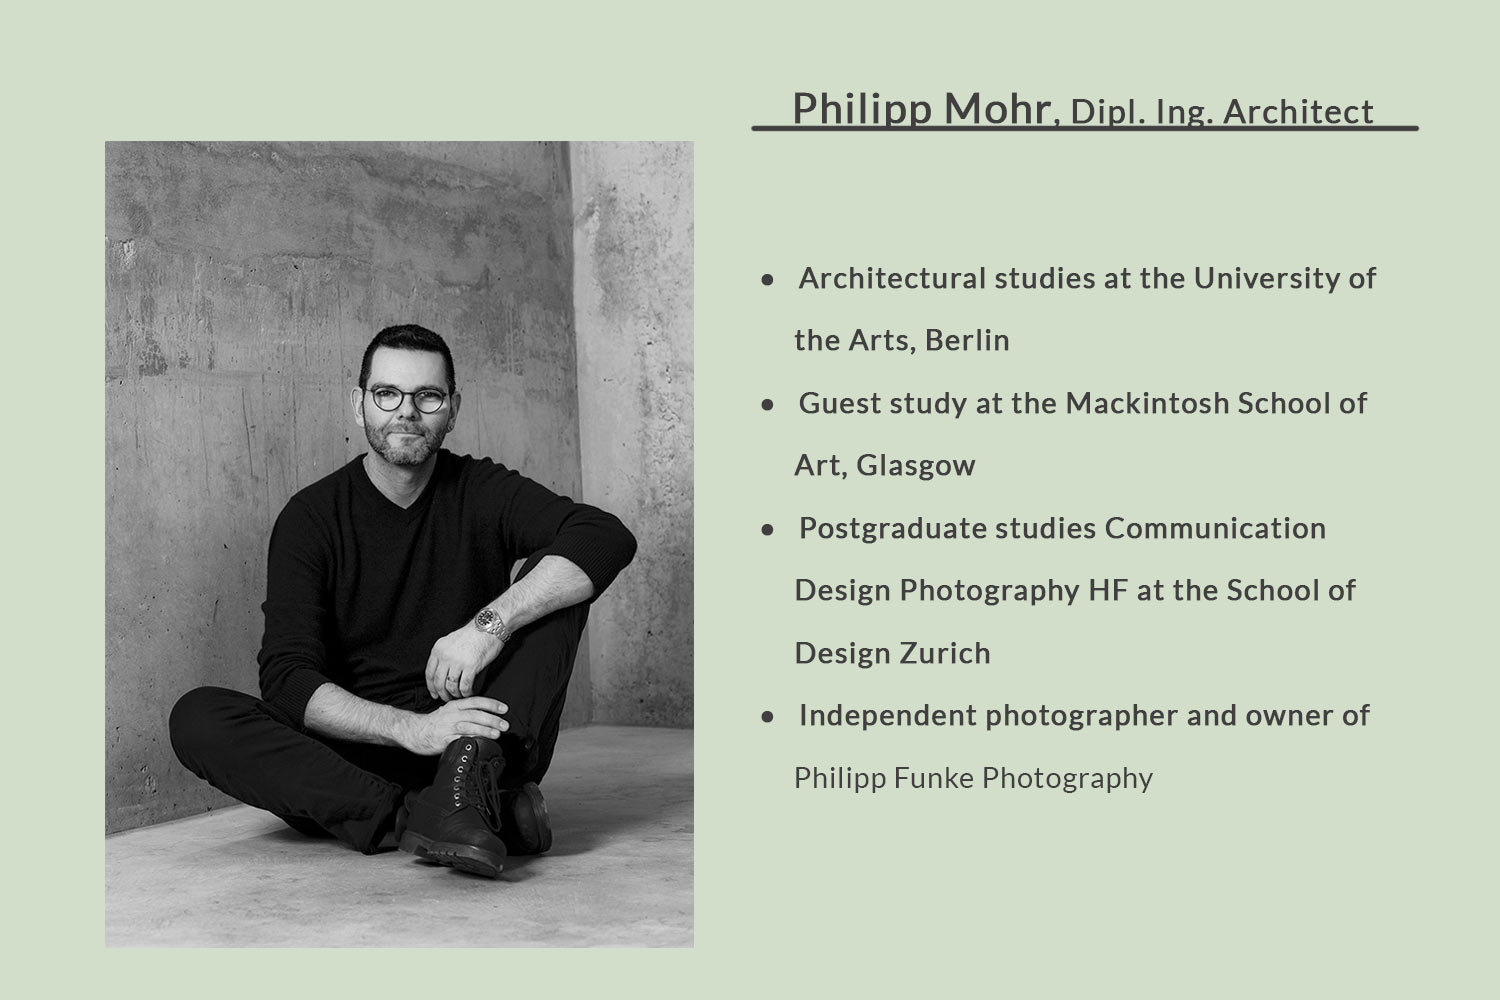 CV Philipp Funke Architectural photographer and Dipl. Ing. Architect